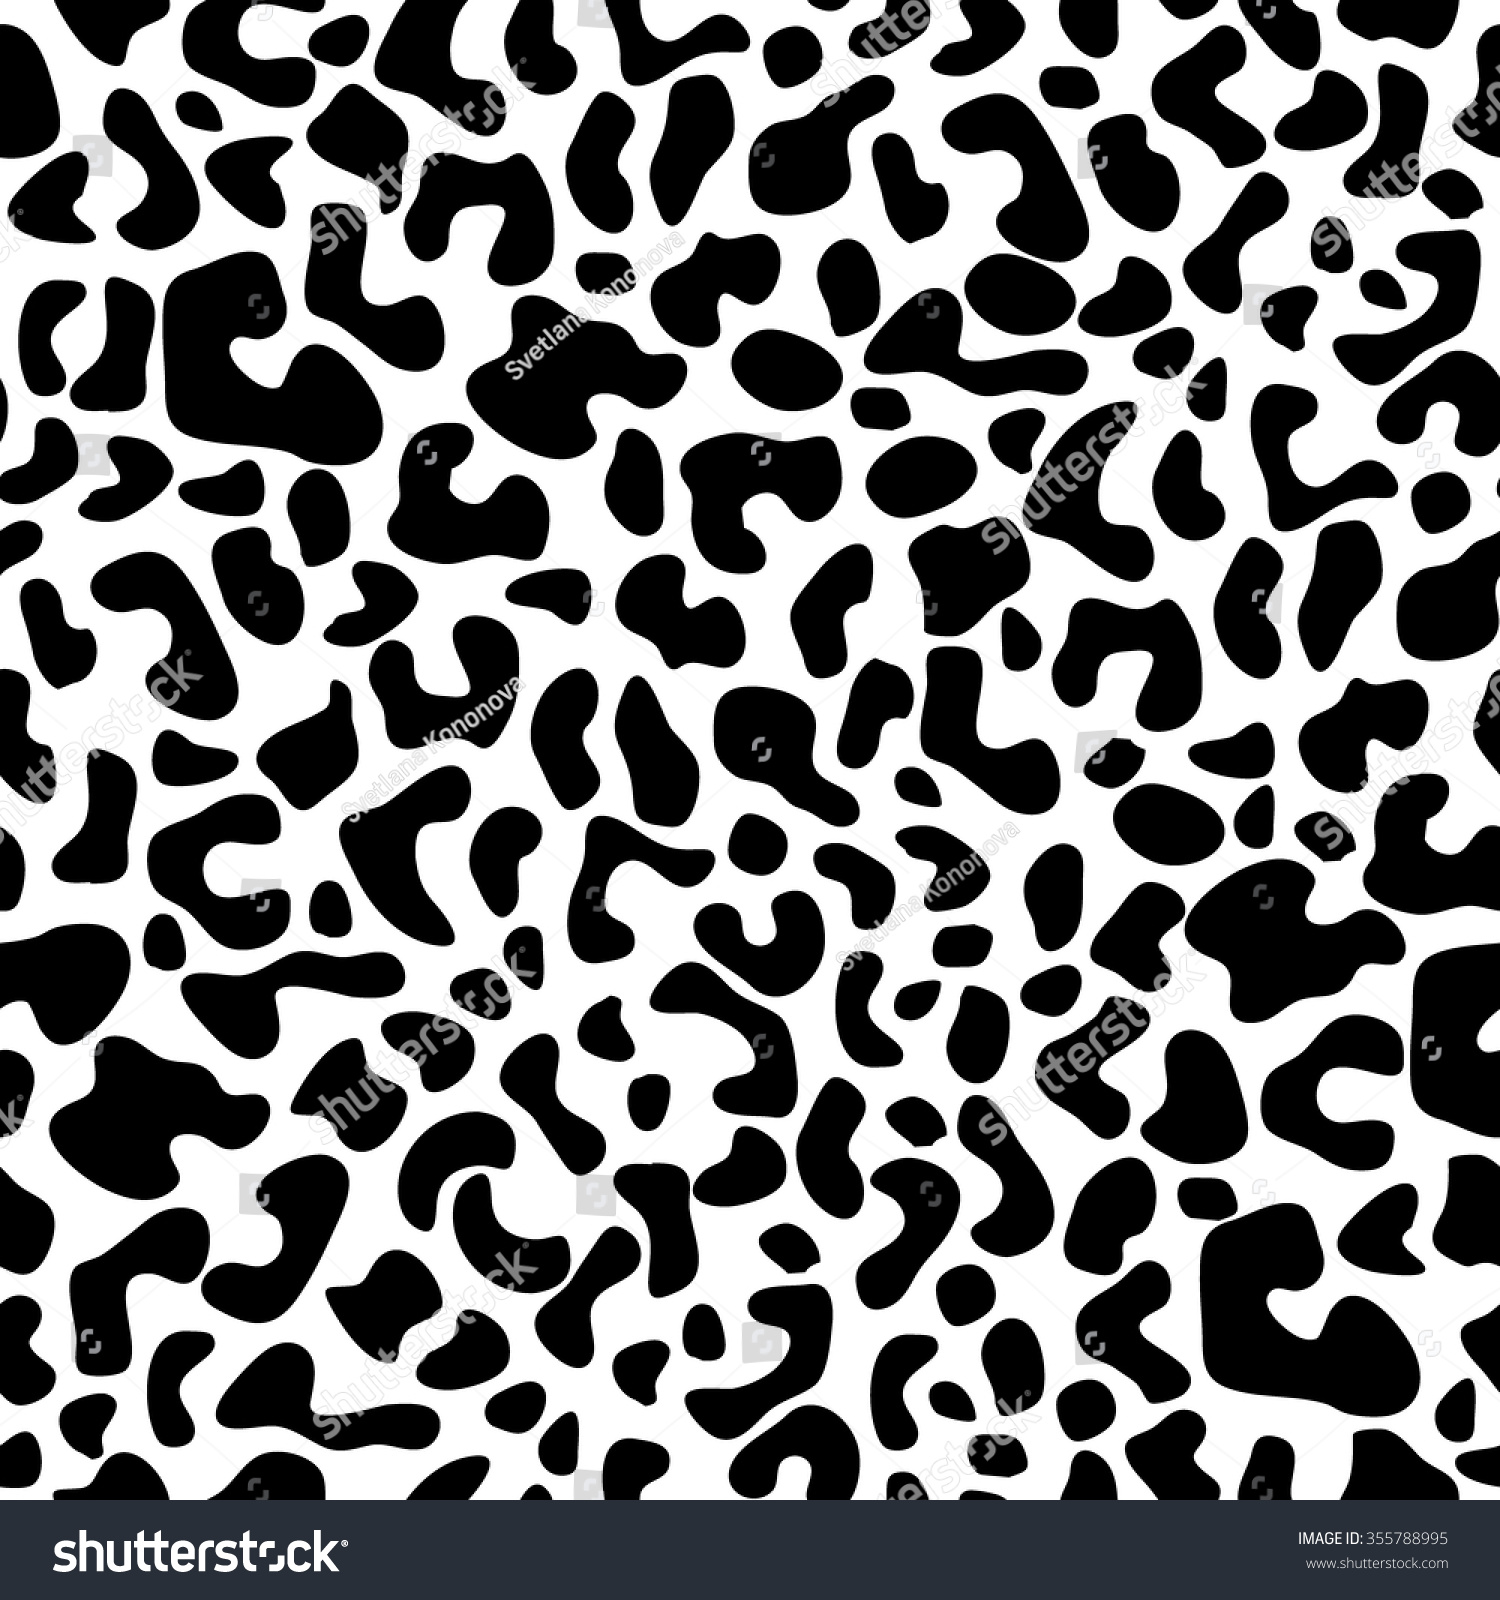 SVG of Leopard classical seamless pattern. Safari textile collection. Black on white. Backgrounds & textures shop. svg